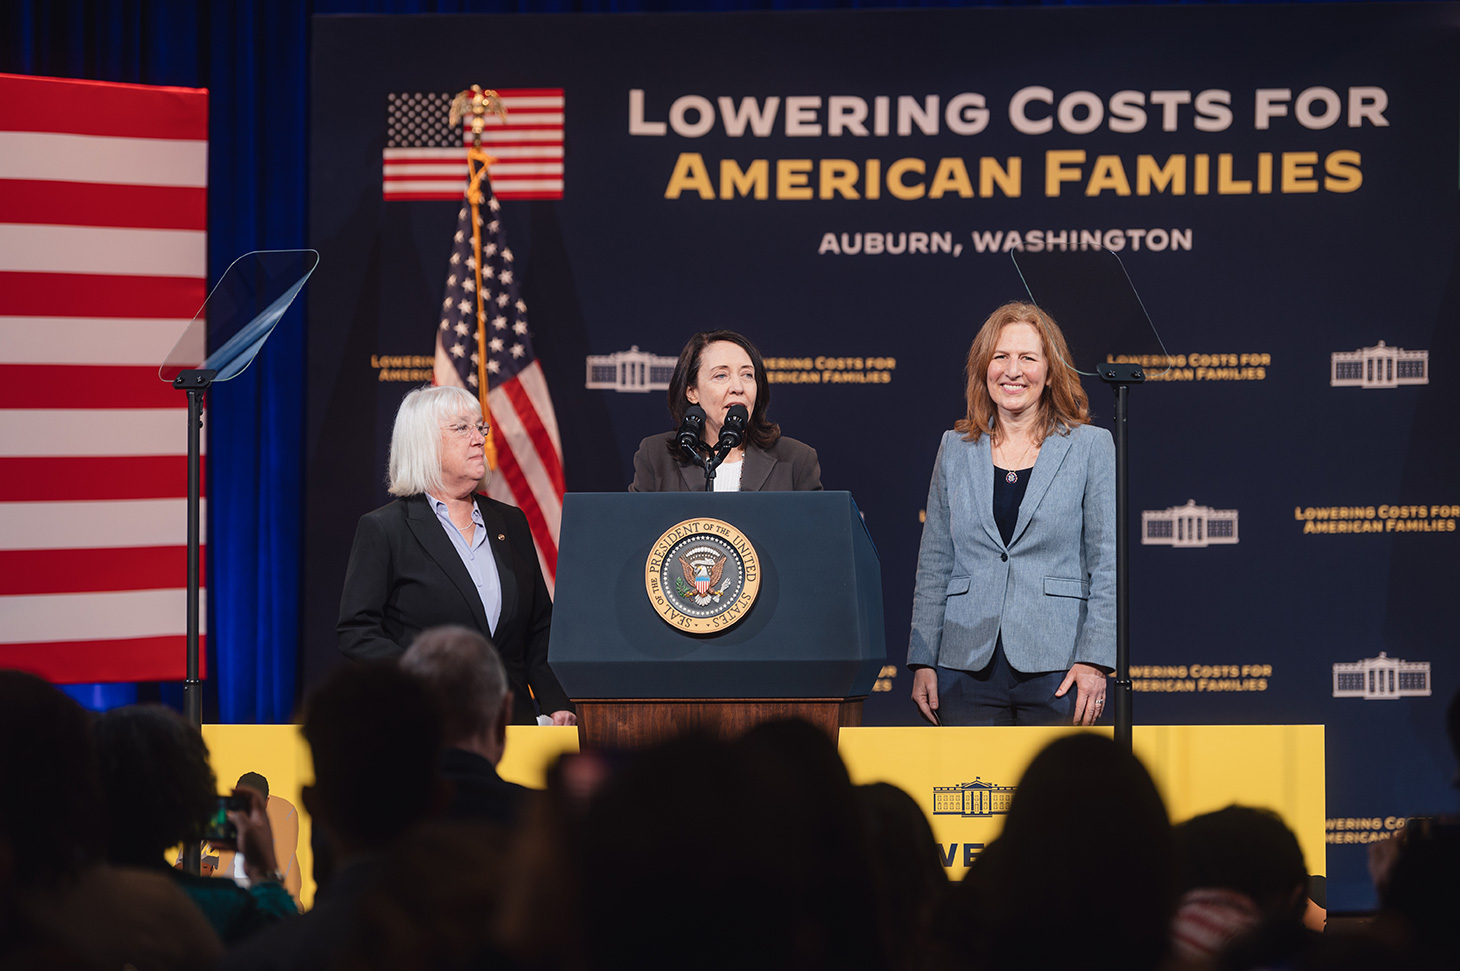 U.S. Senators Maria Cantwell and Patty Murray, and U.S. Rep. Kim Schrier also provided remarks.